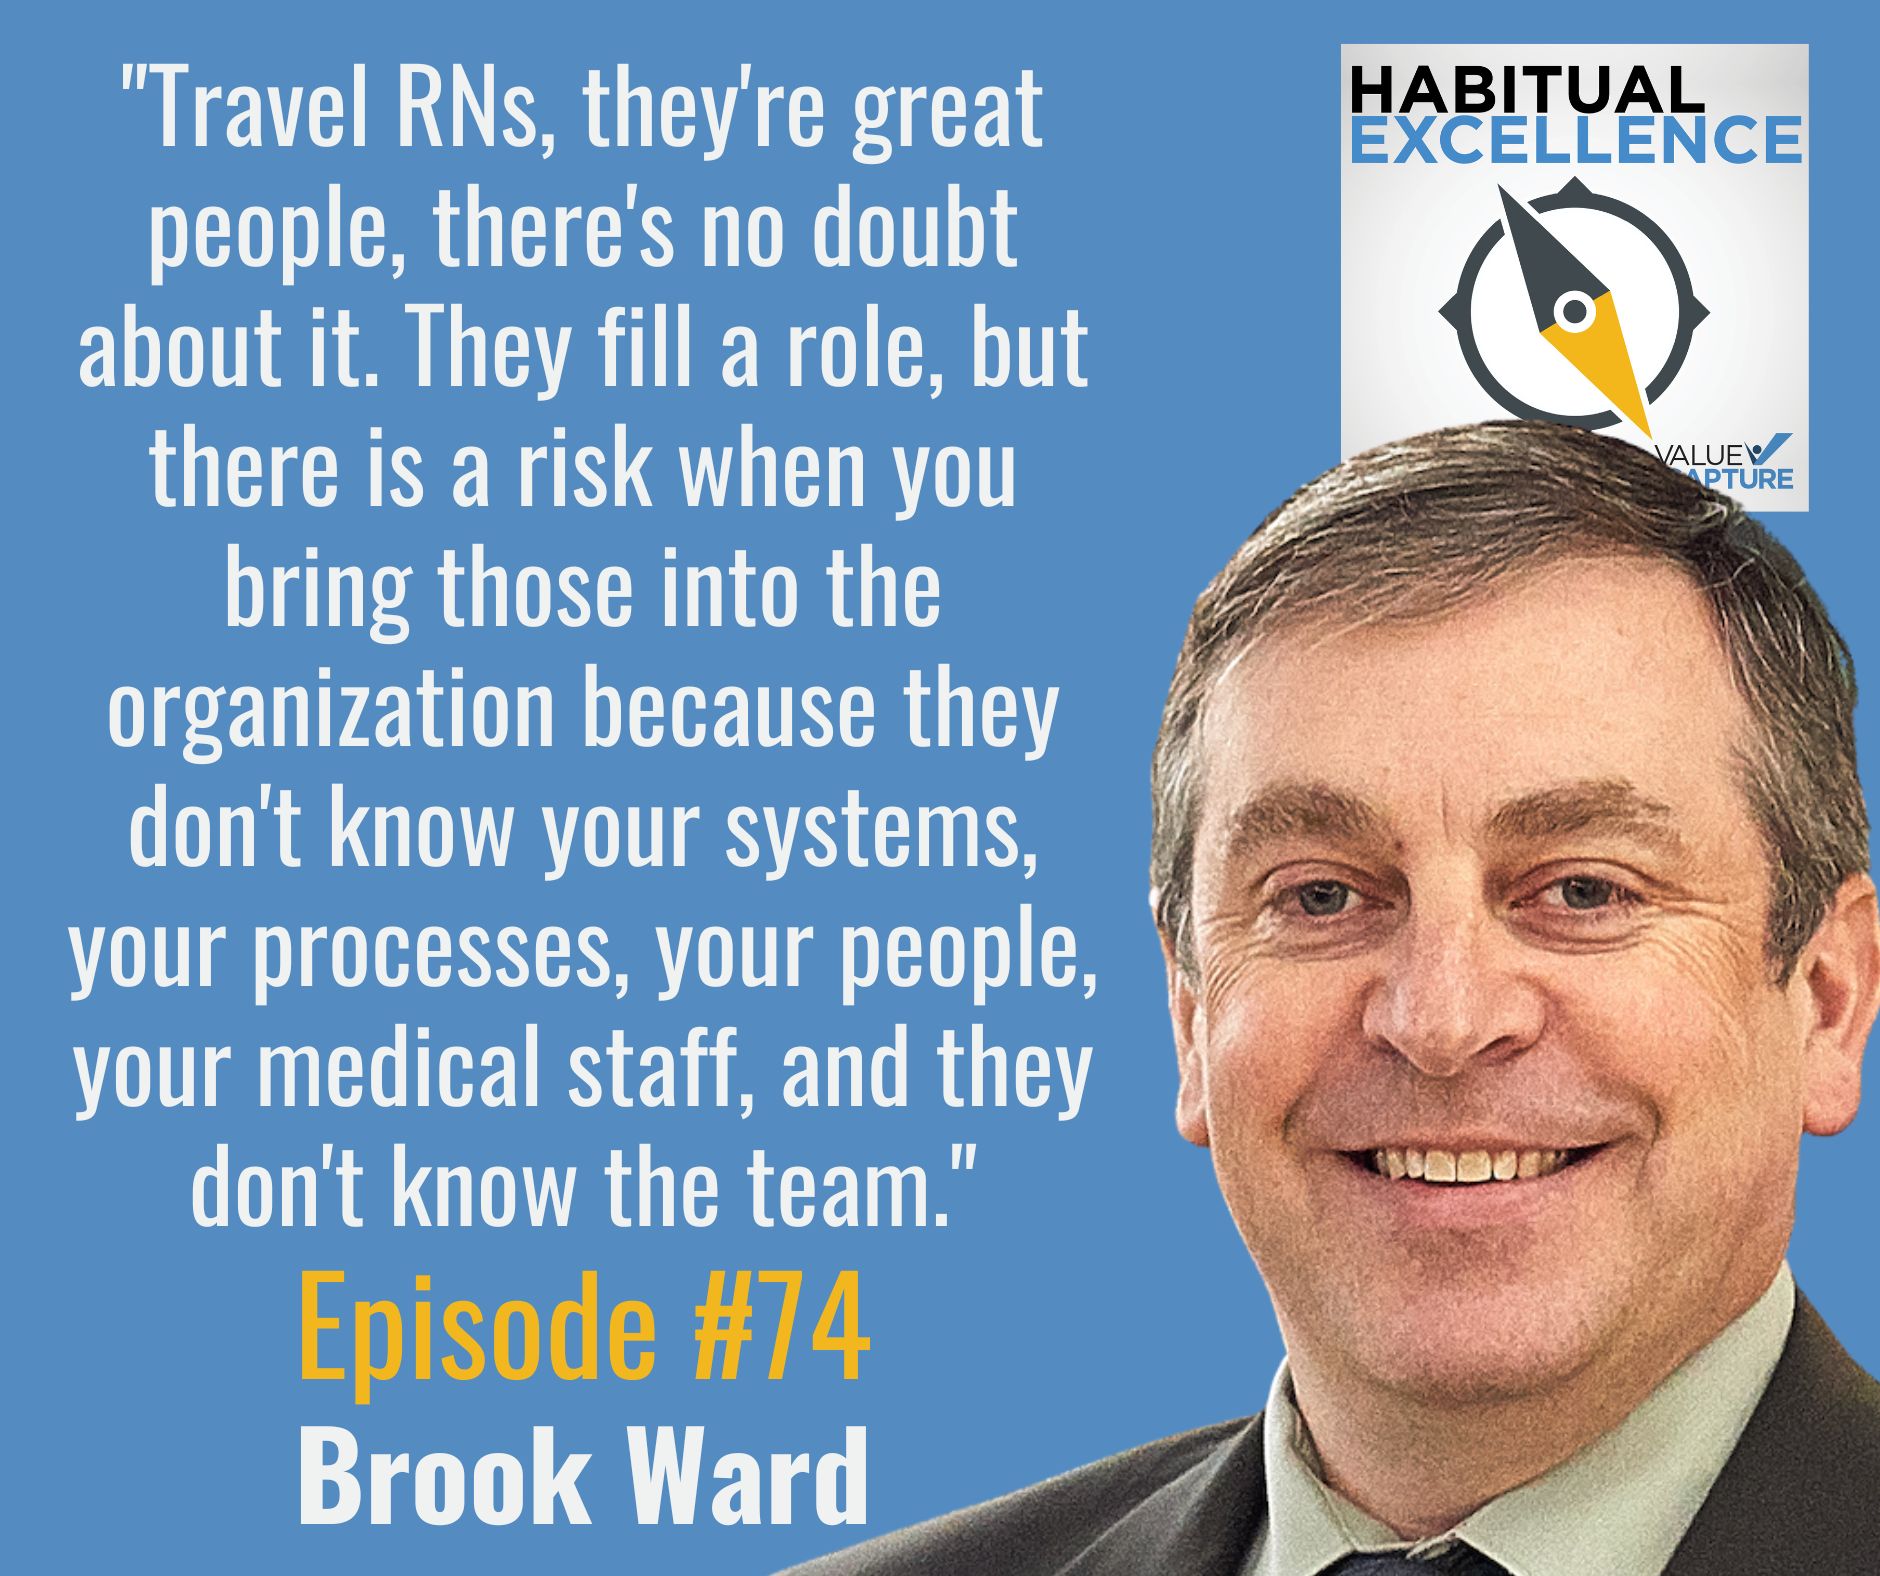 "Travel RNs, they're great people, there's no doubt about it. They fill a role, but there is a risk when you bring those into the organization because they don't know your systems, your processes, your people, your medical staff, and they don't know the team."